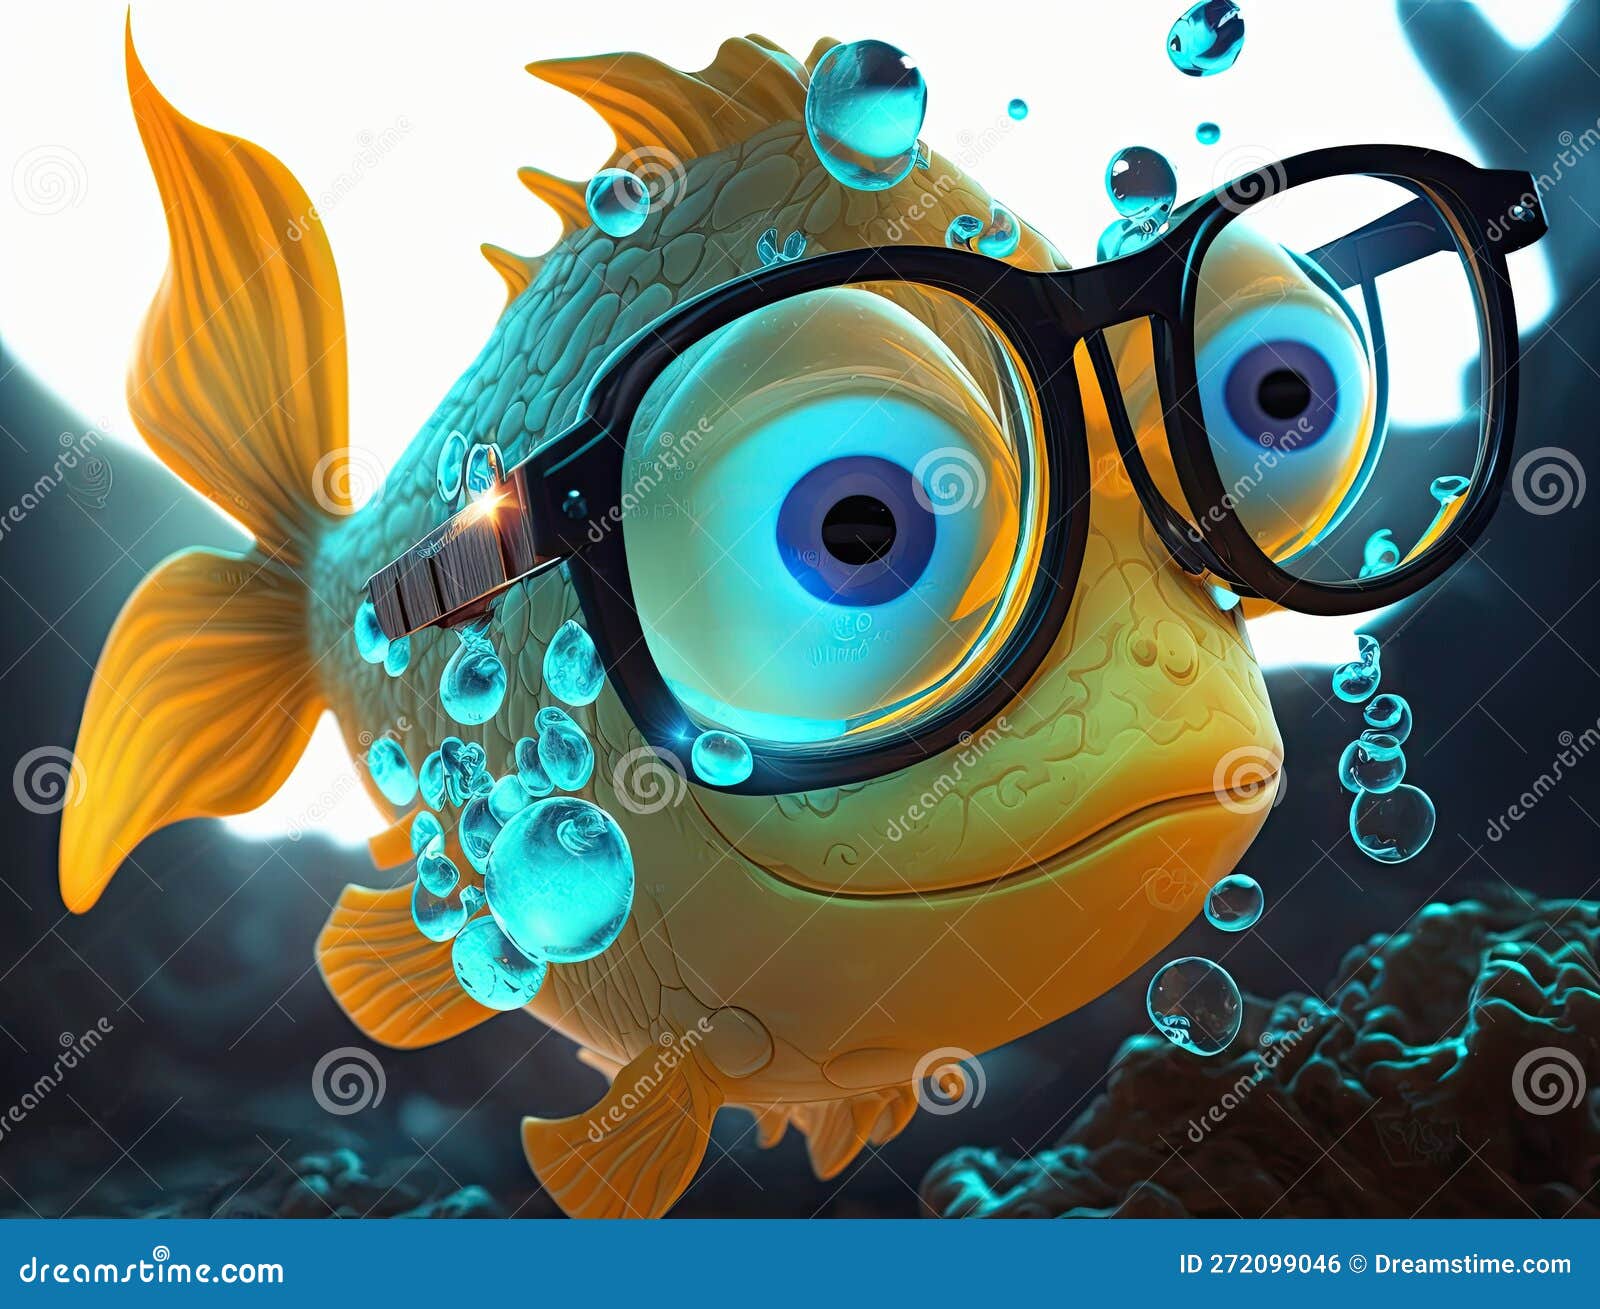 Funny Fish Face Anthropomorphic Person in Glasses Neon Glowing